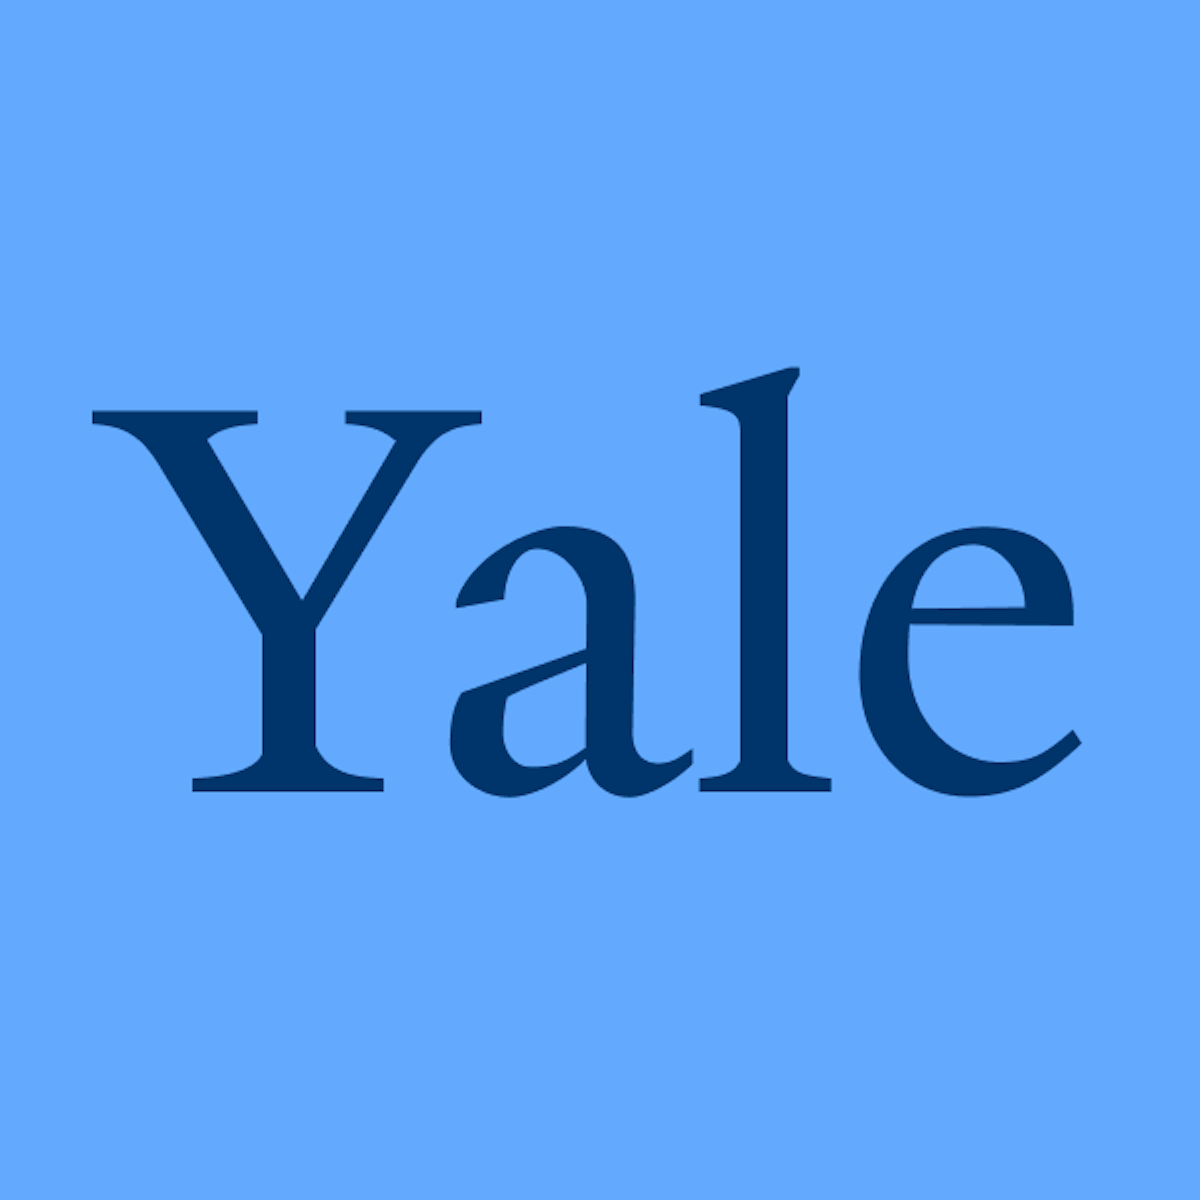 Yale's first design system